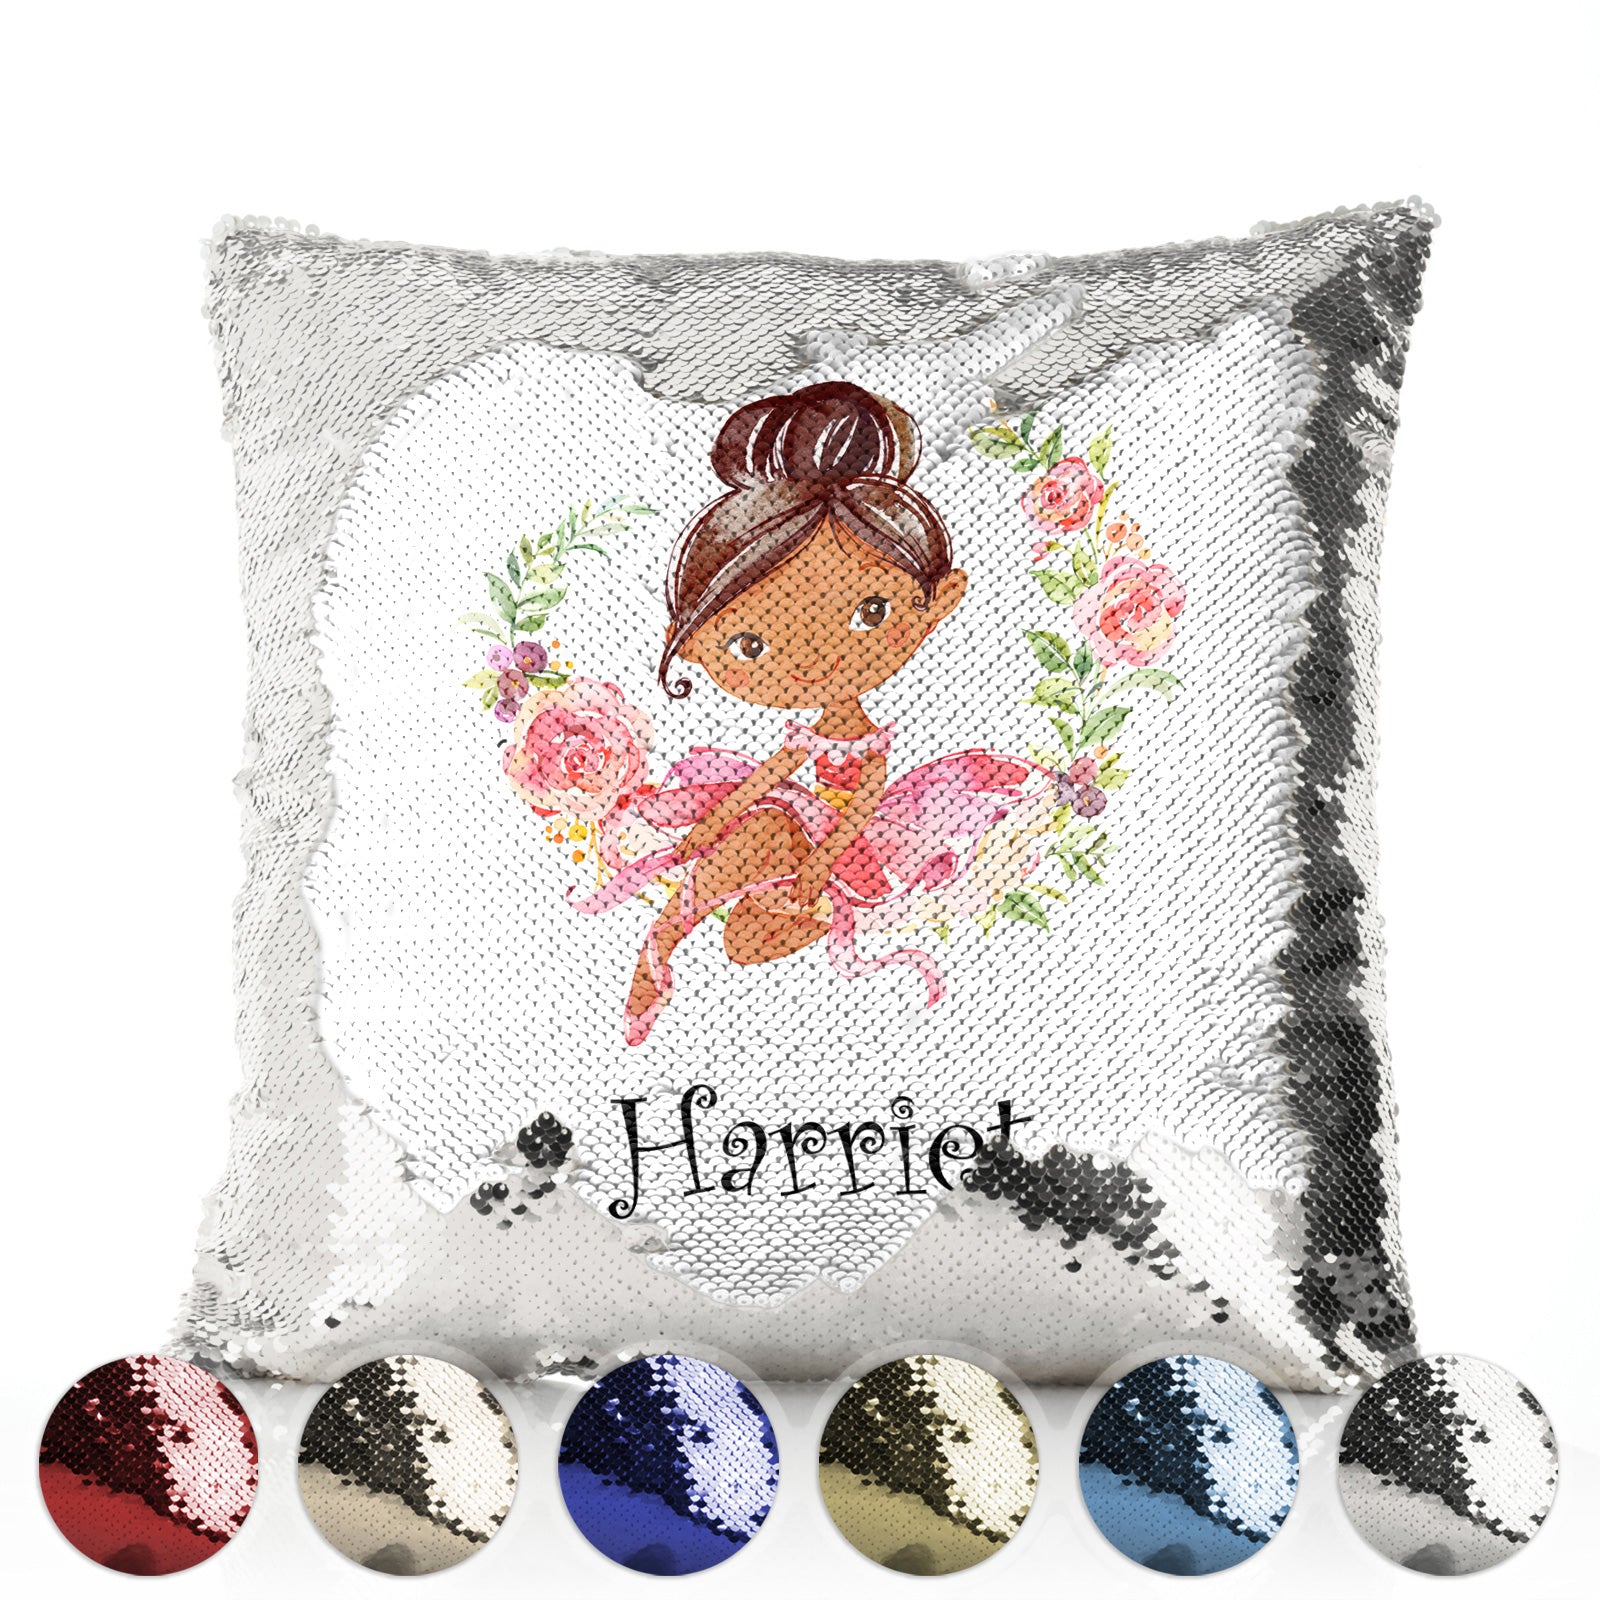 Personalised Sequin Cushion with Cute Text and Flower Wreath Black Hair Ballerina